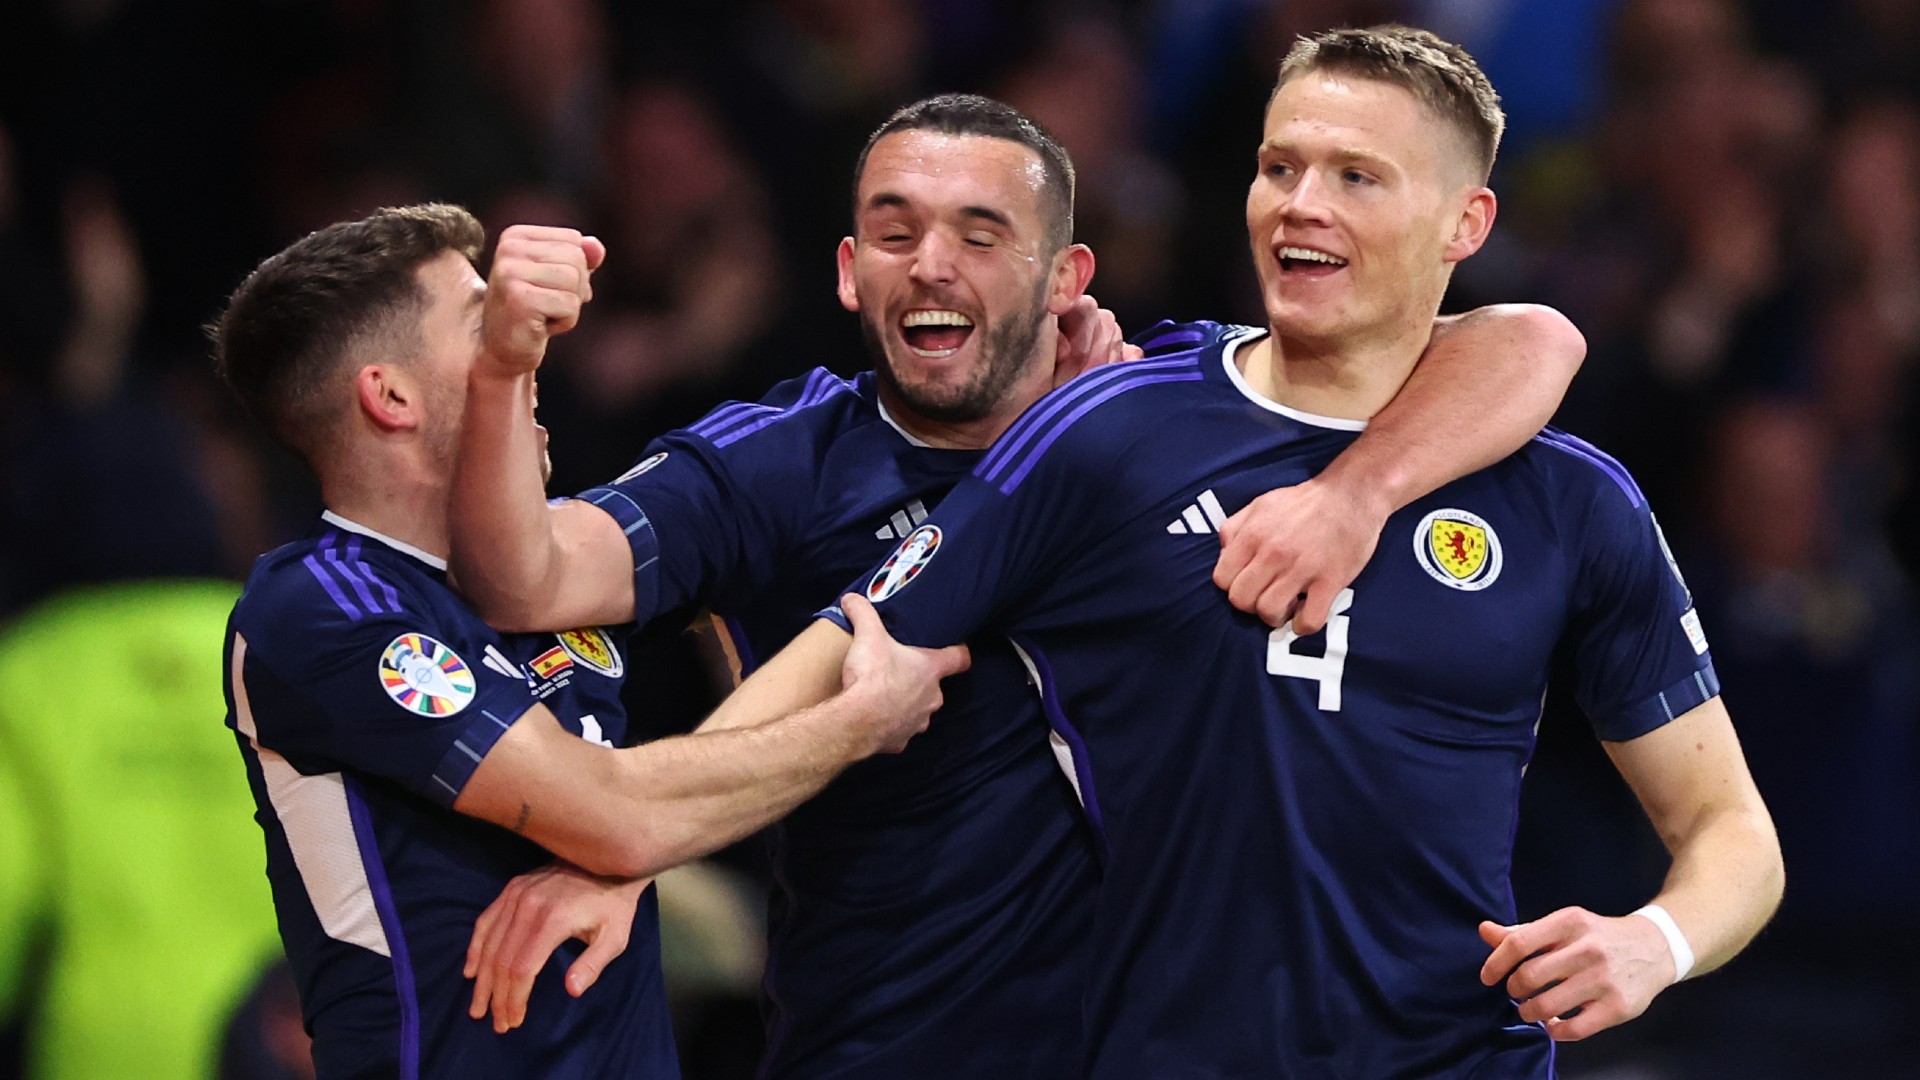 Scotland stuns Spain after McTominay double